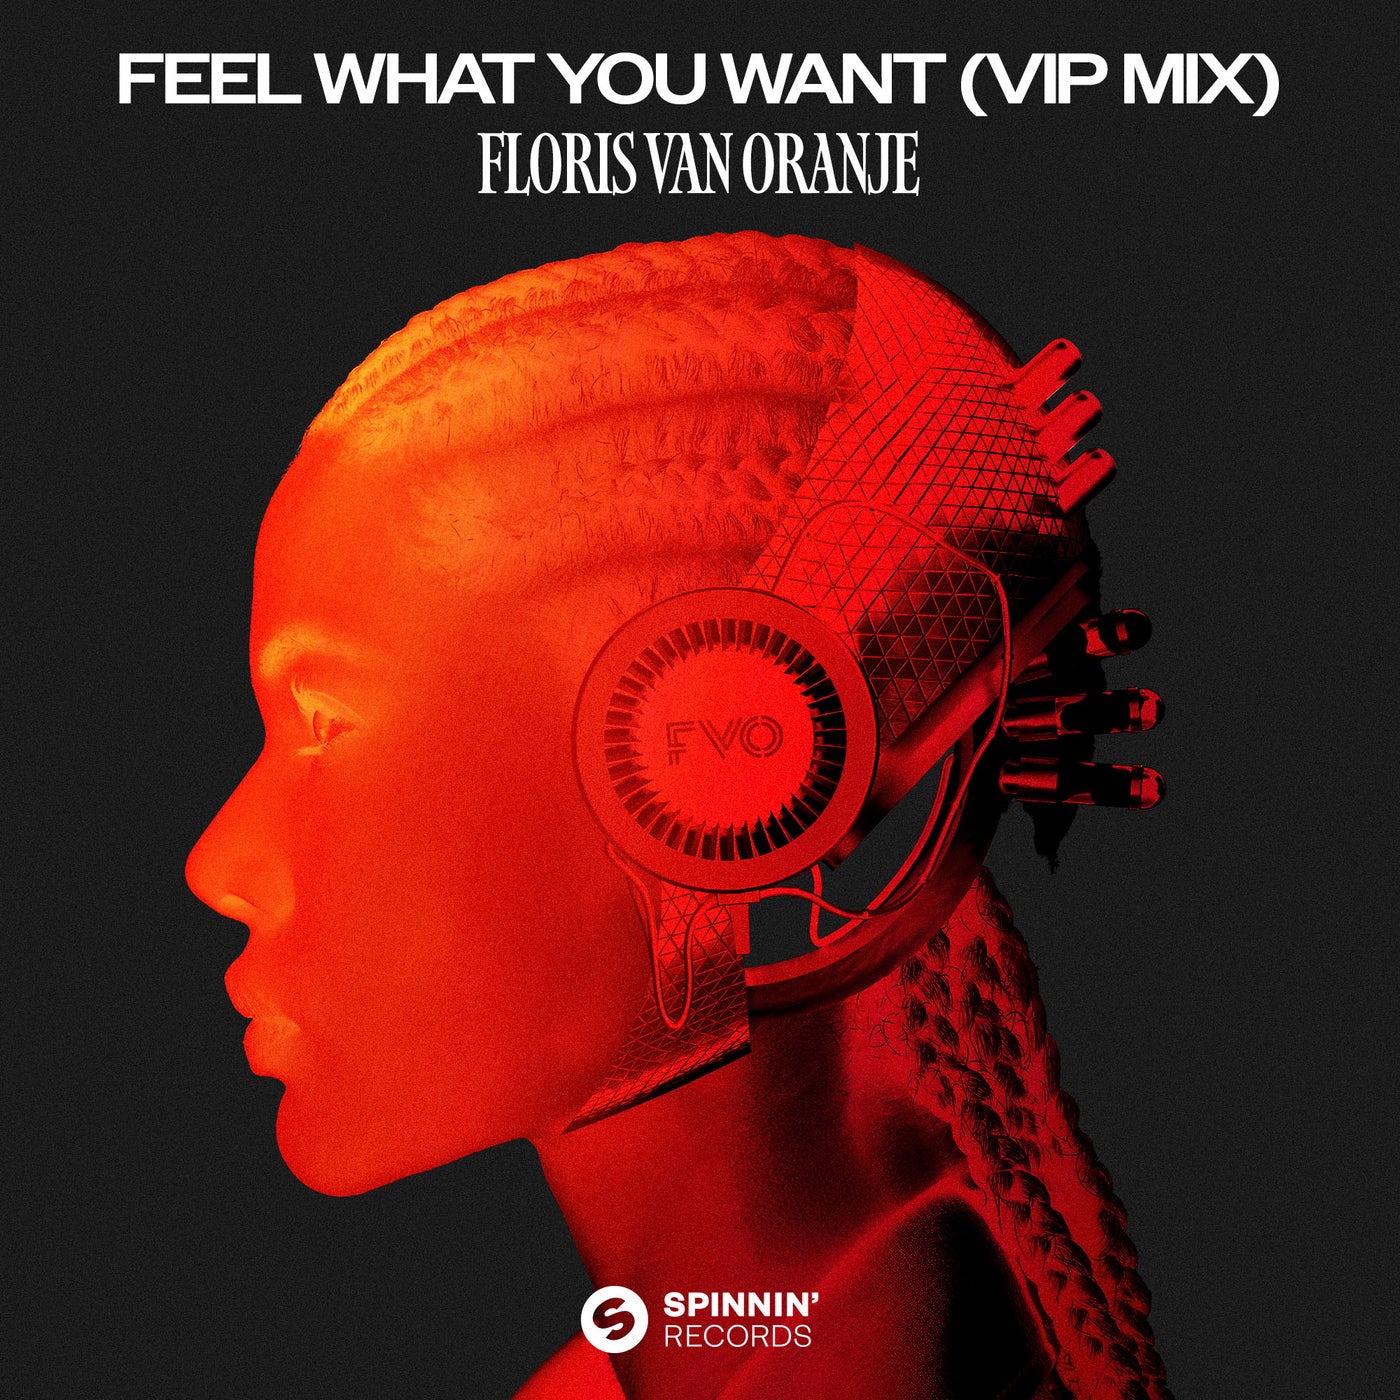 image cover: Floris van Oranje - Feel What You Want (VIP Mix) on SPINNIN' RECORDS